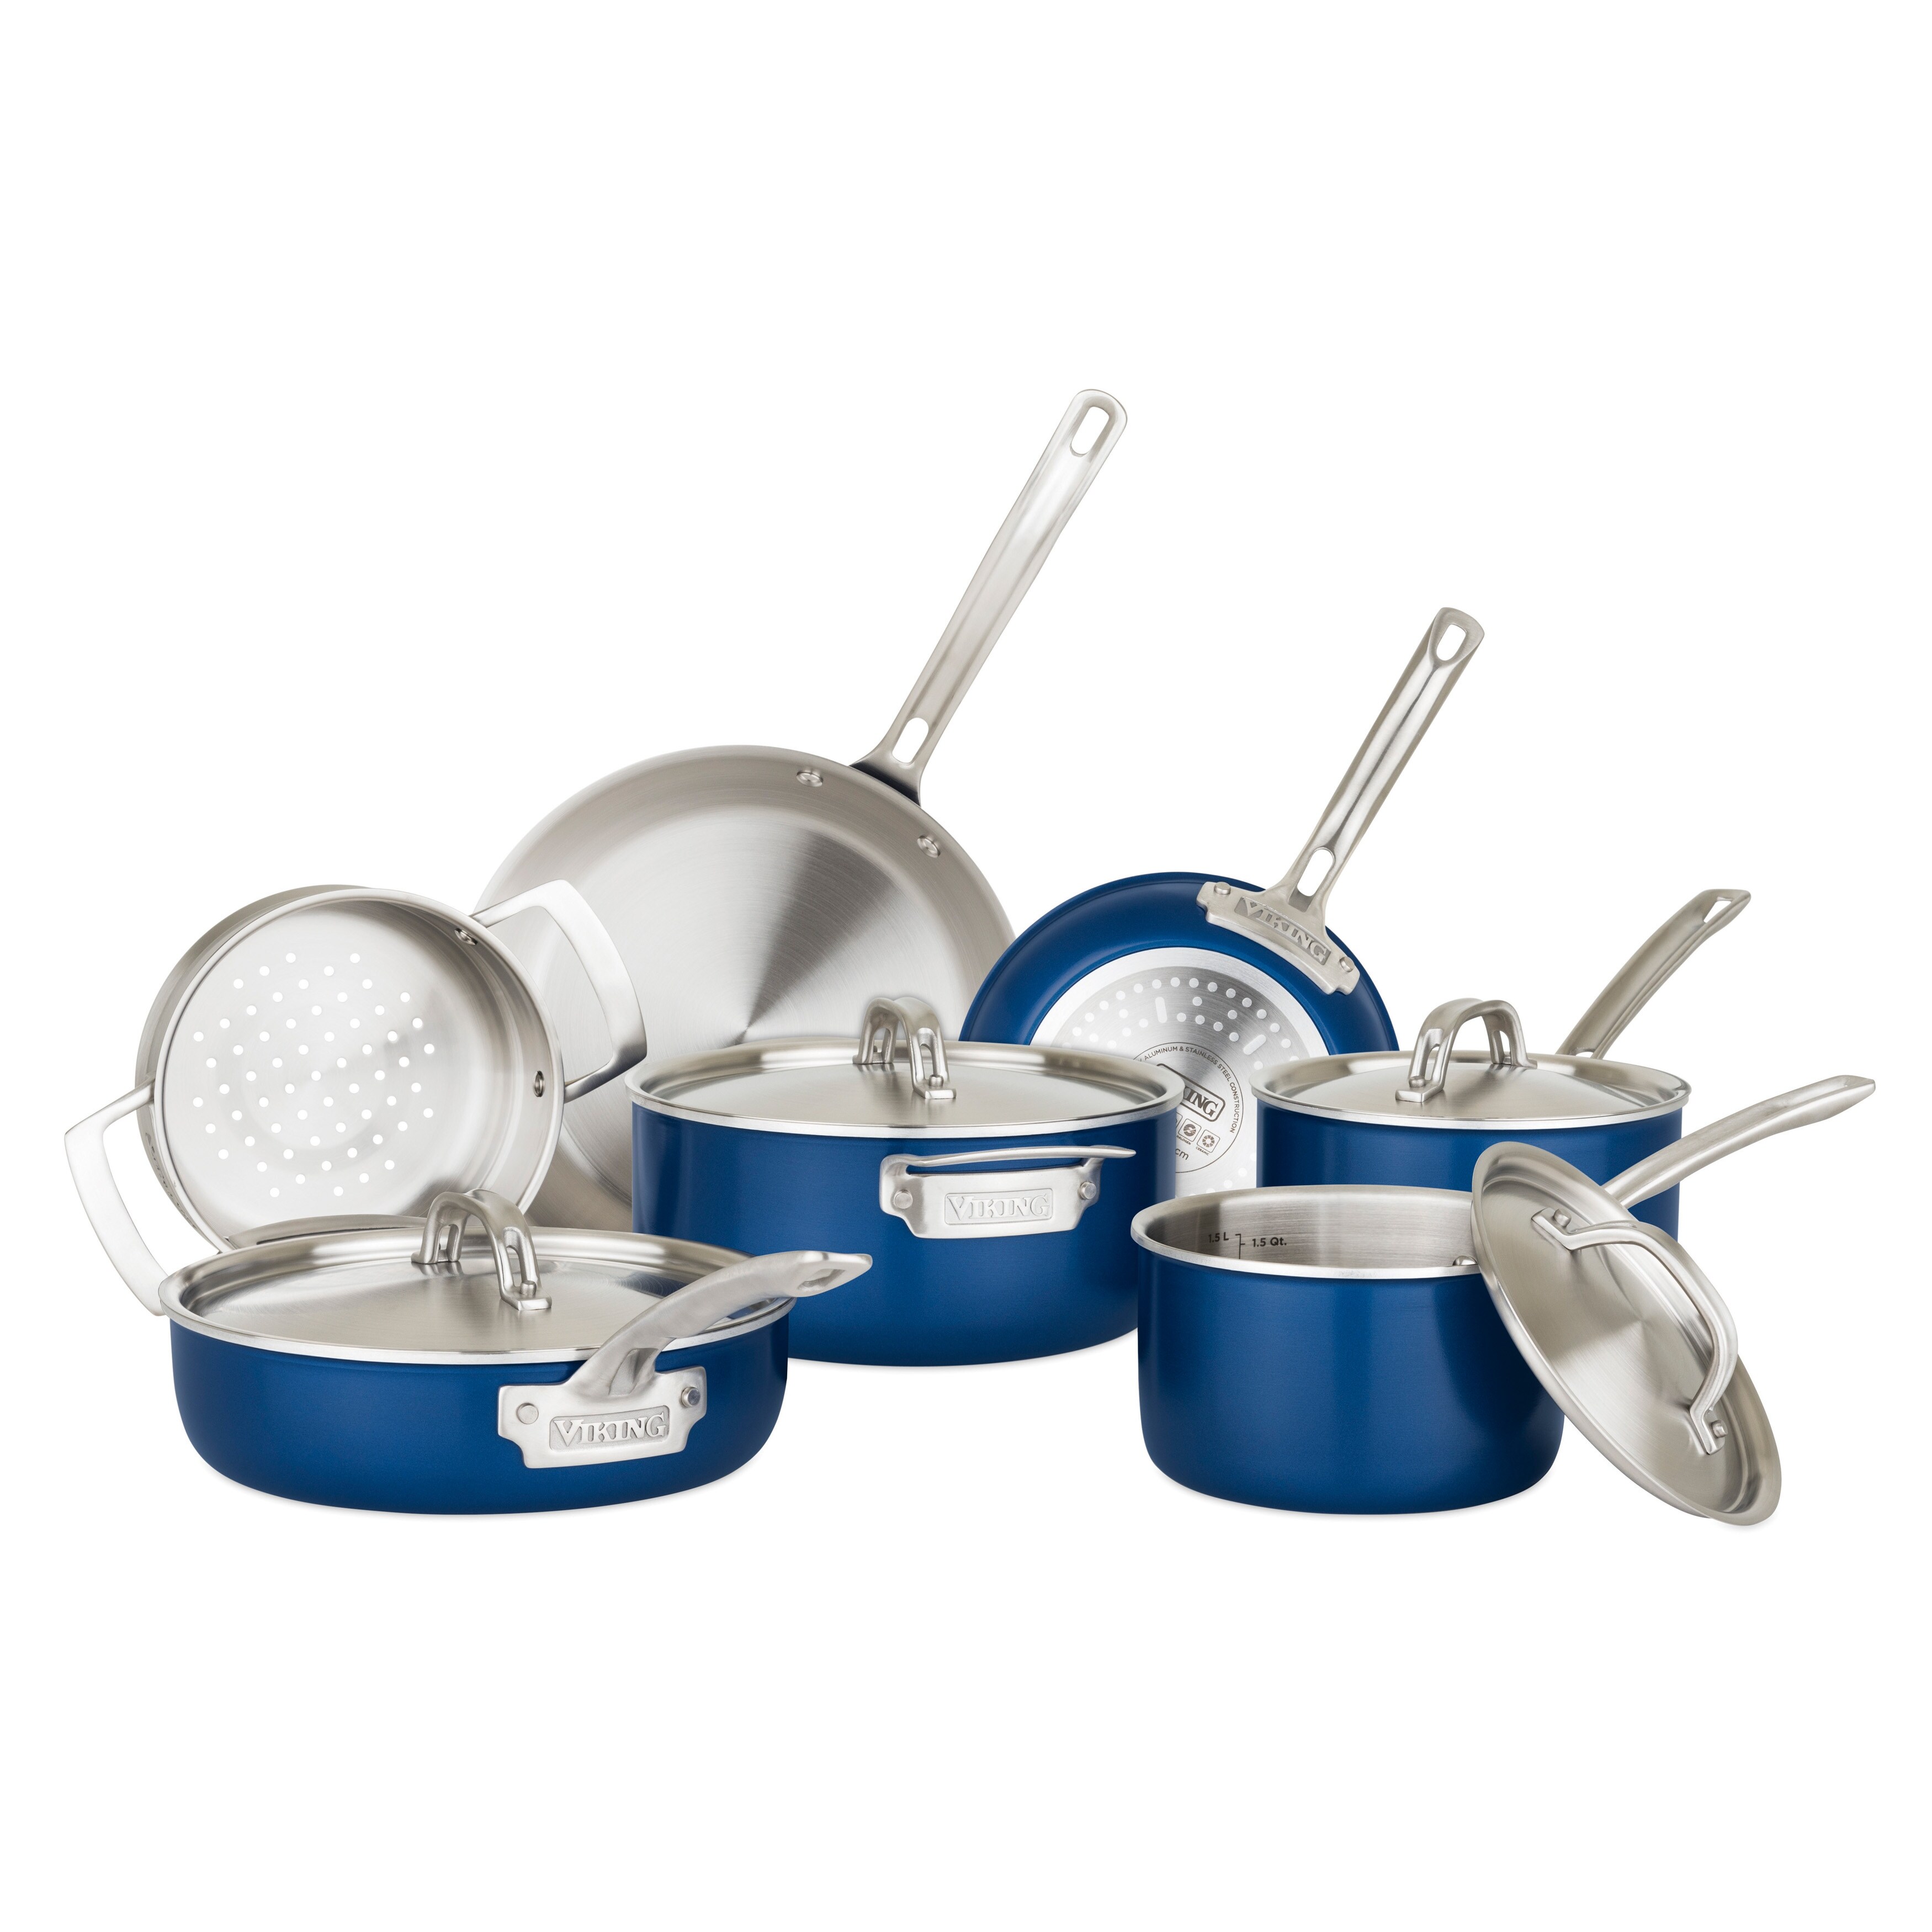 https://ak1.ostkcdn.com/images/products/is/images/direct/a7e753c3f5742592ce859e73b5d4d531980da759/Viking-2Ply-11pc-Cookware-set-%2C-Blue.jpg